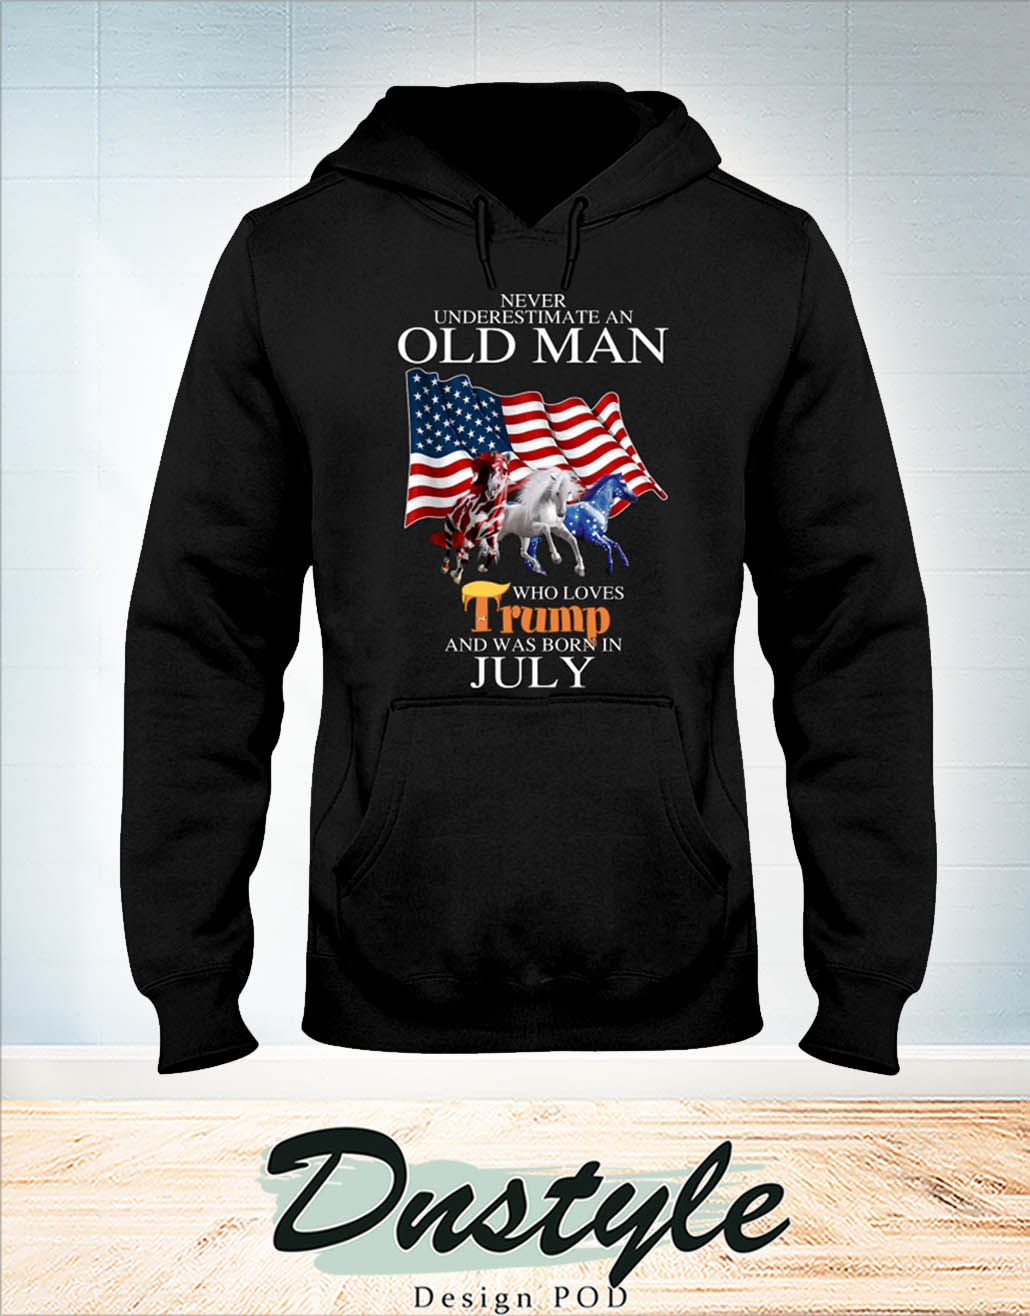 Horse freedom never underestimate an old man who loves trump and was born in july hoodie